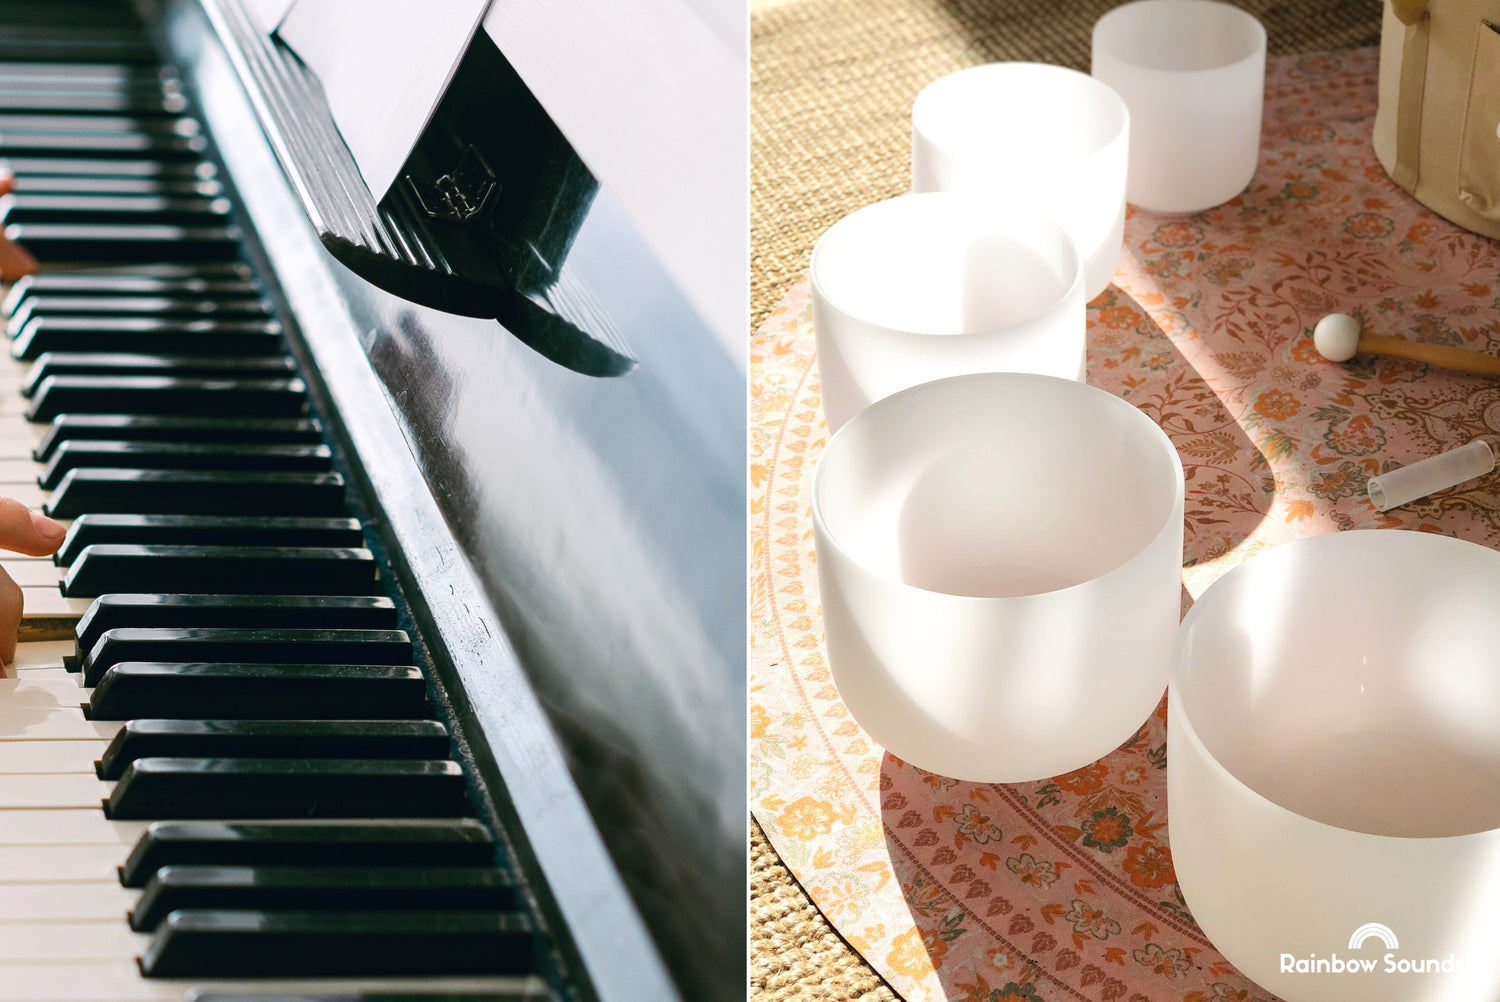 Musical Notes Explained: Crystal Bowls vs Piano